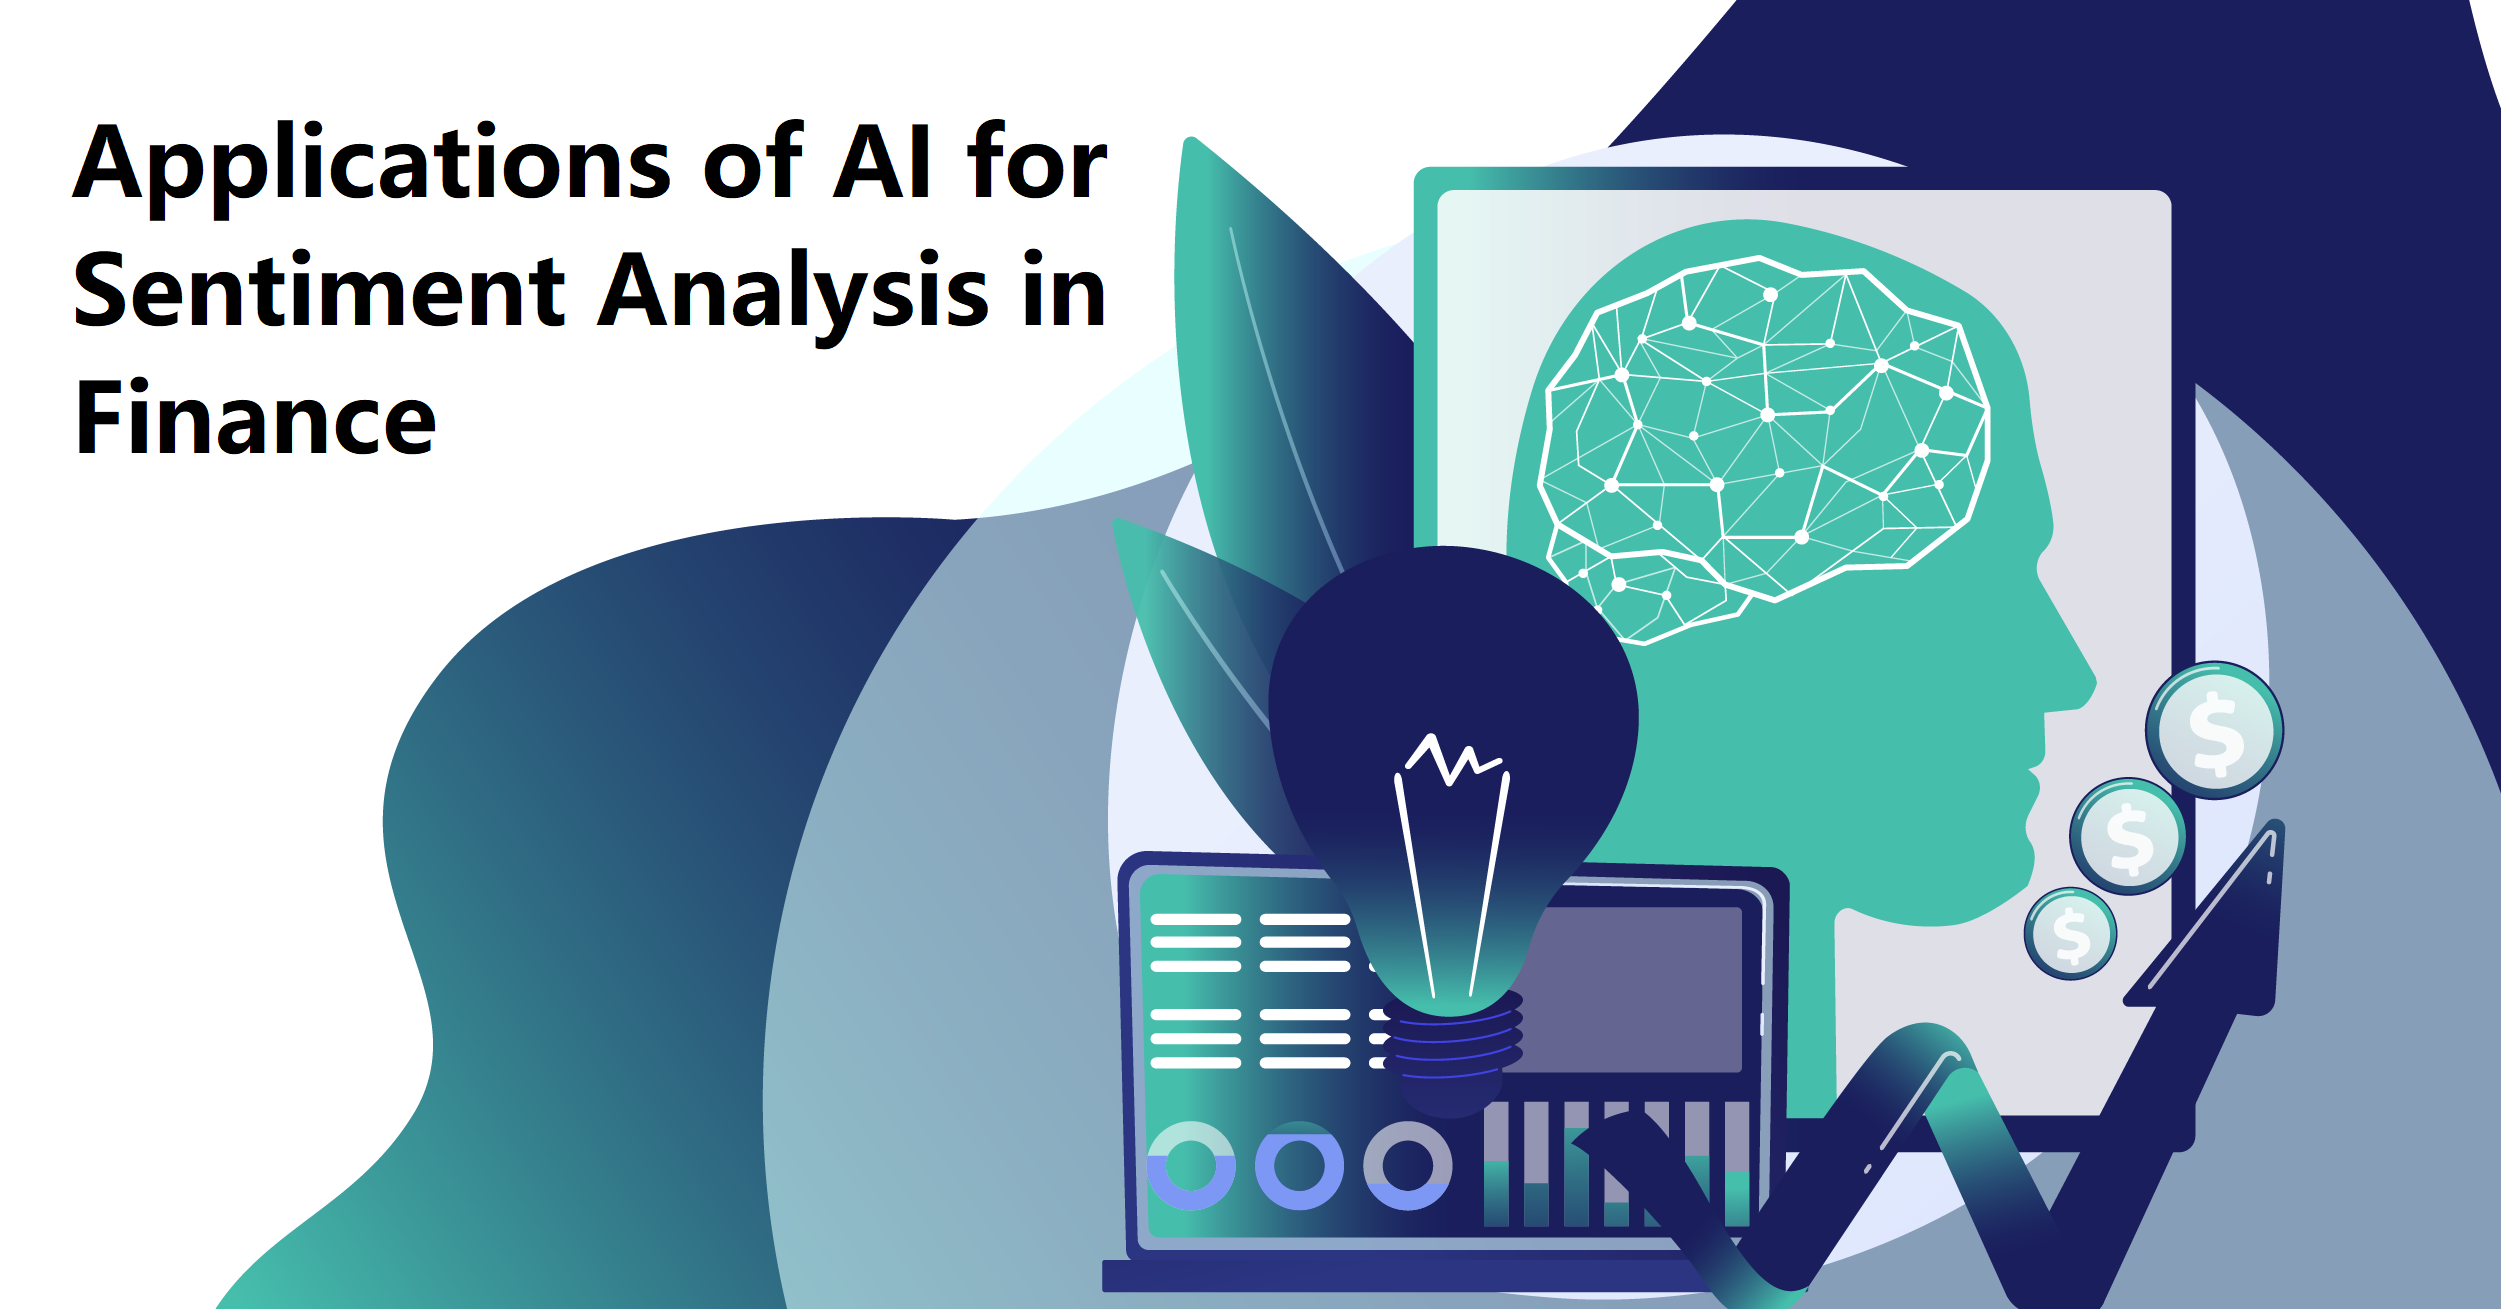 Top 3 Applications of AI for Sentiment Analysis in Finance